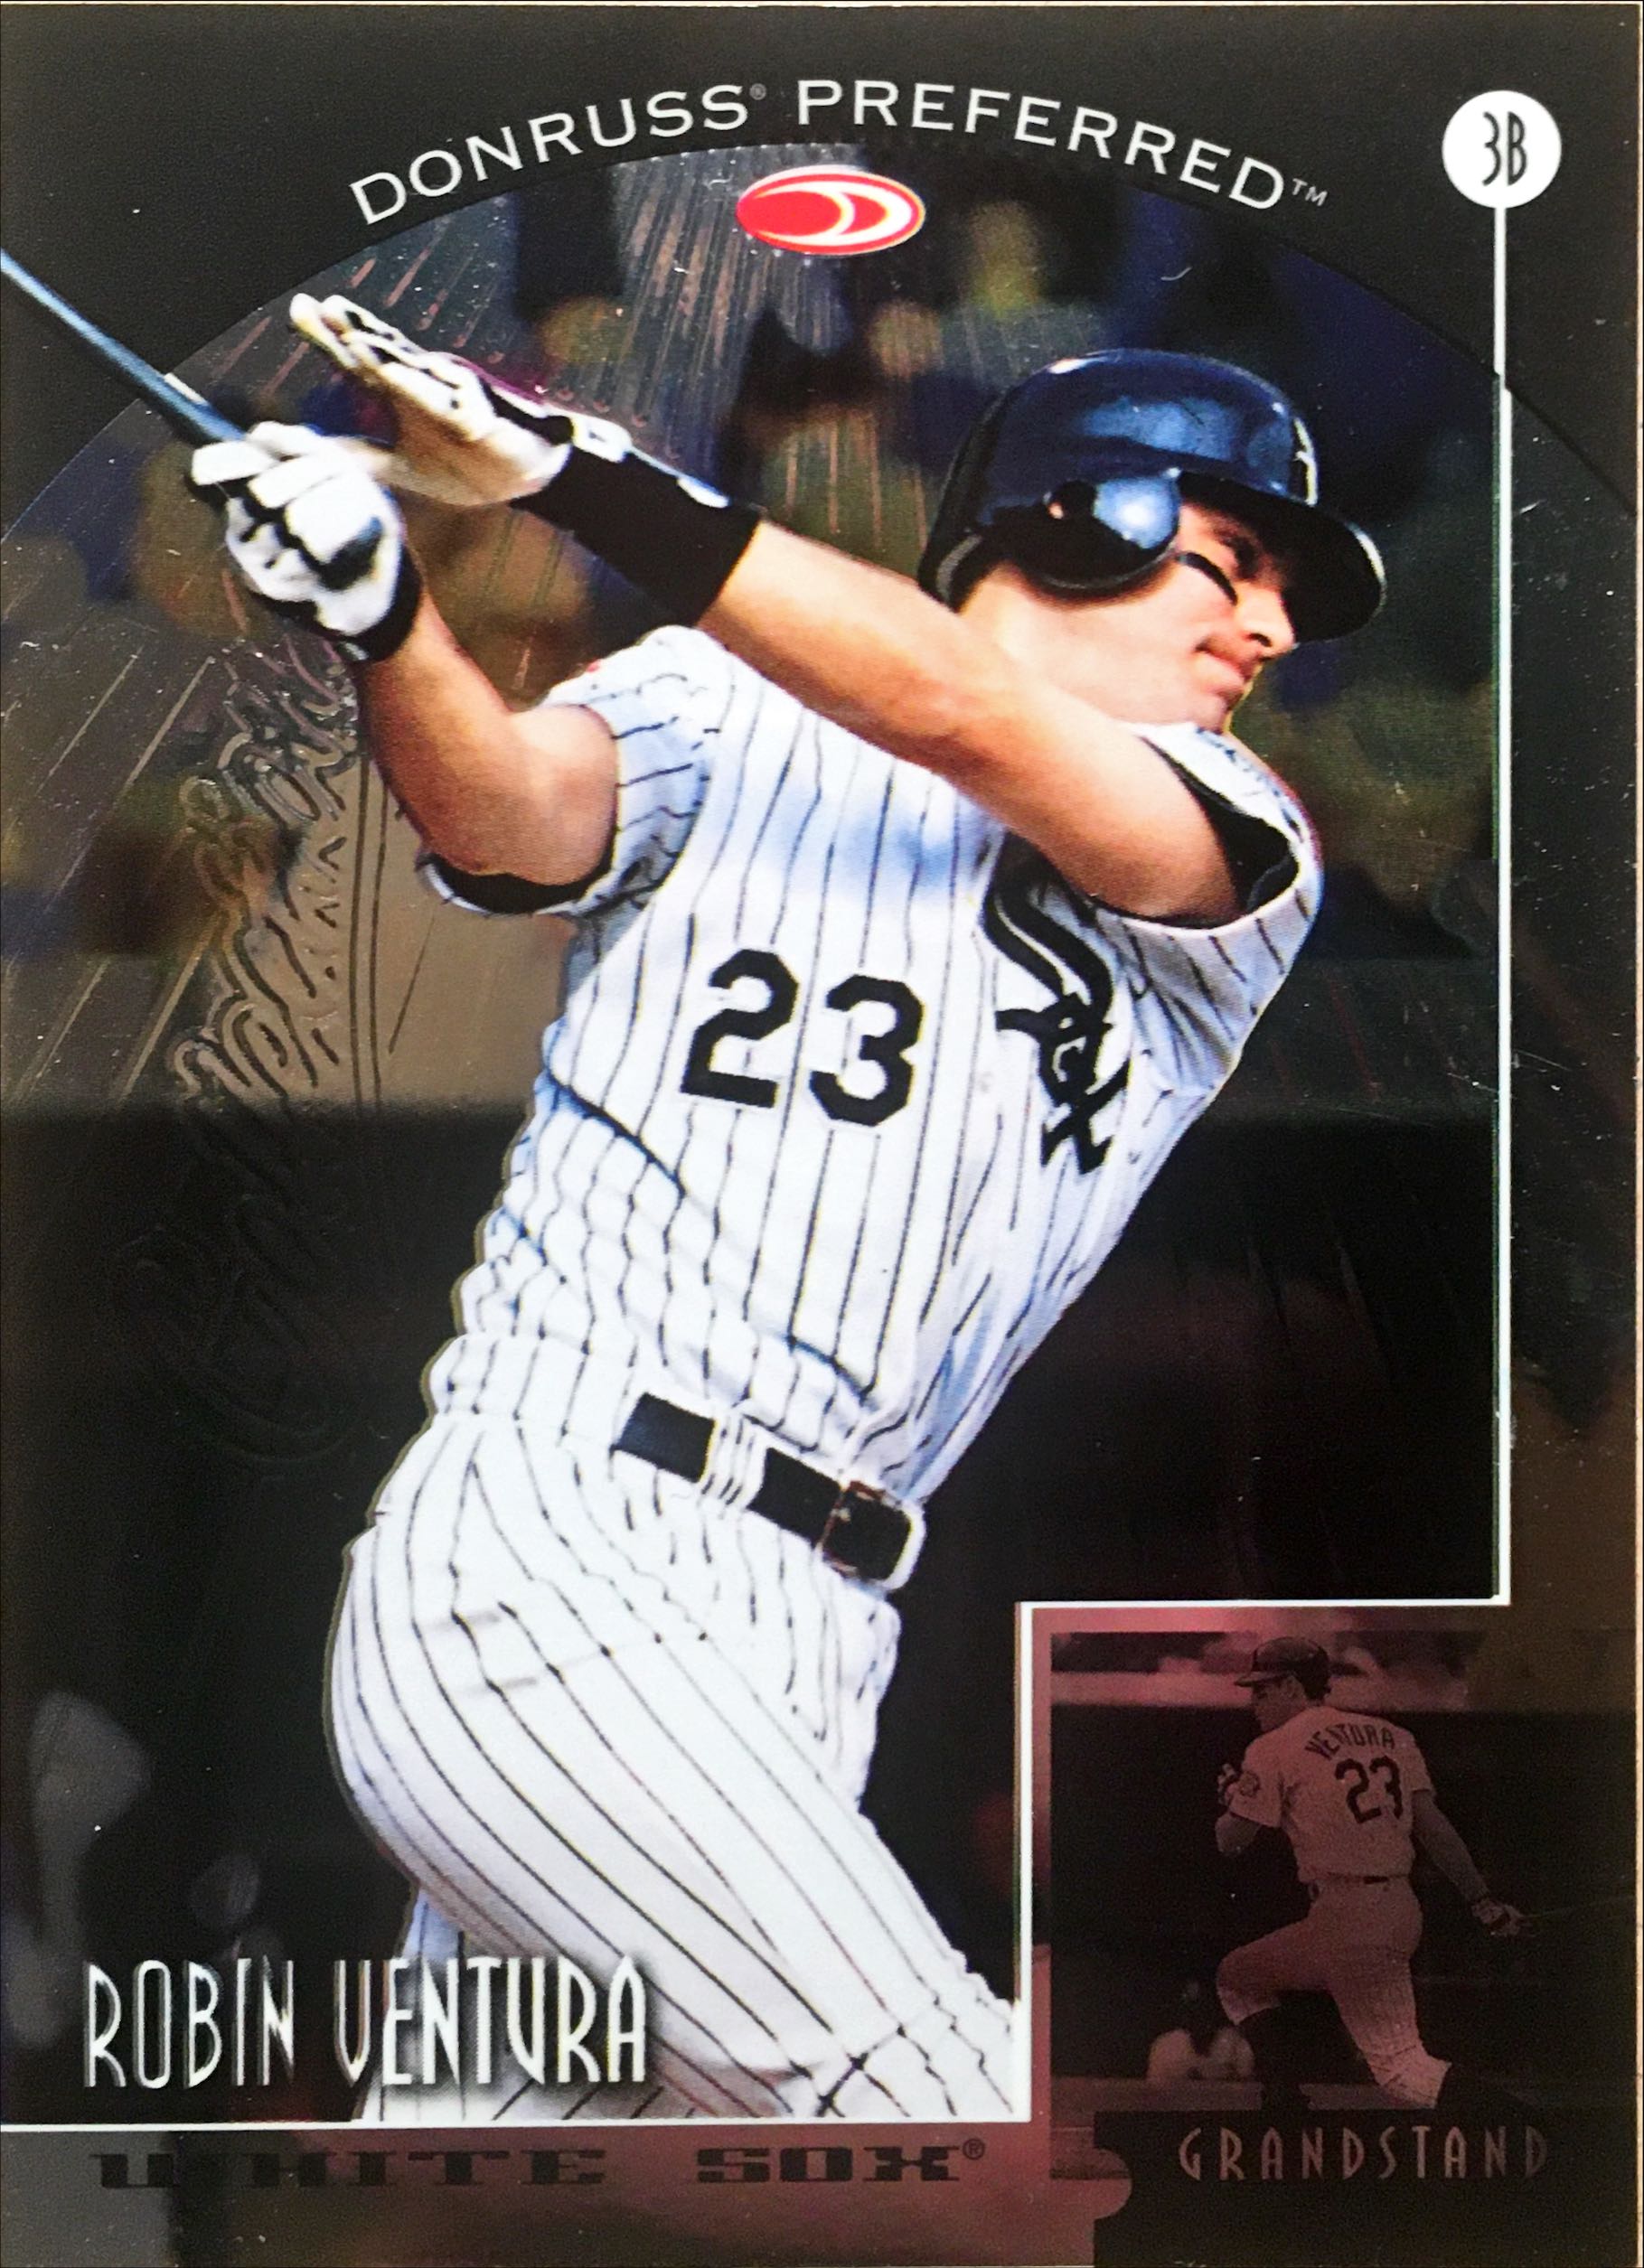 1998 Donruss Collections Preferred 632 front image